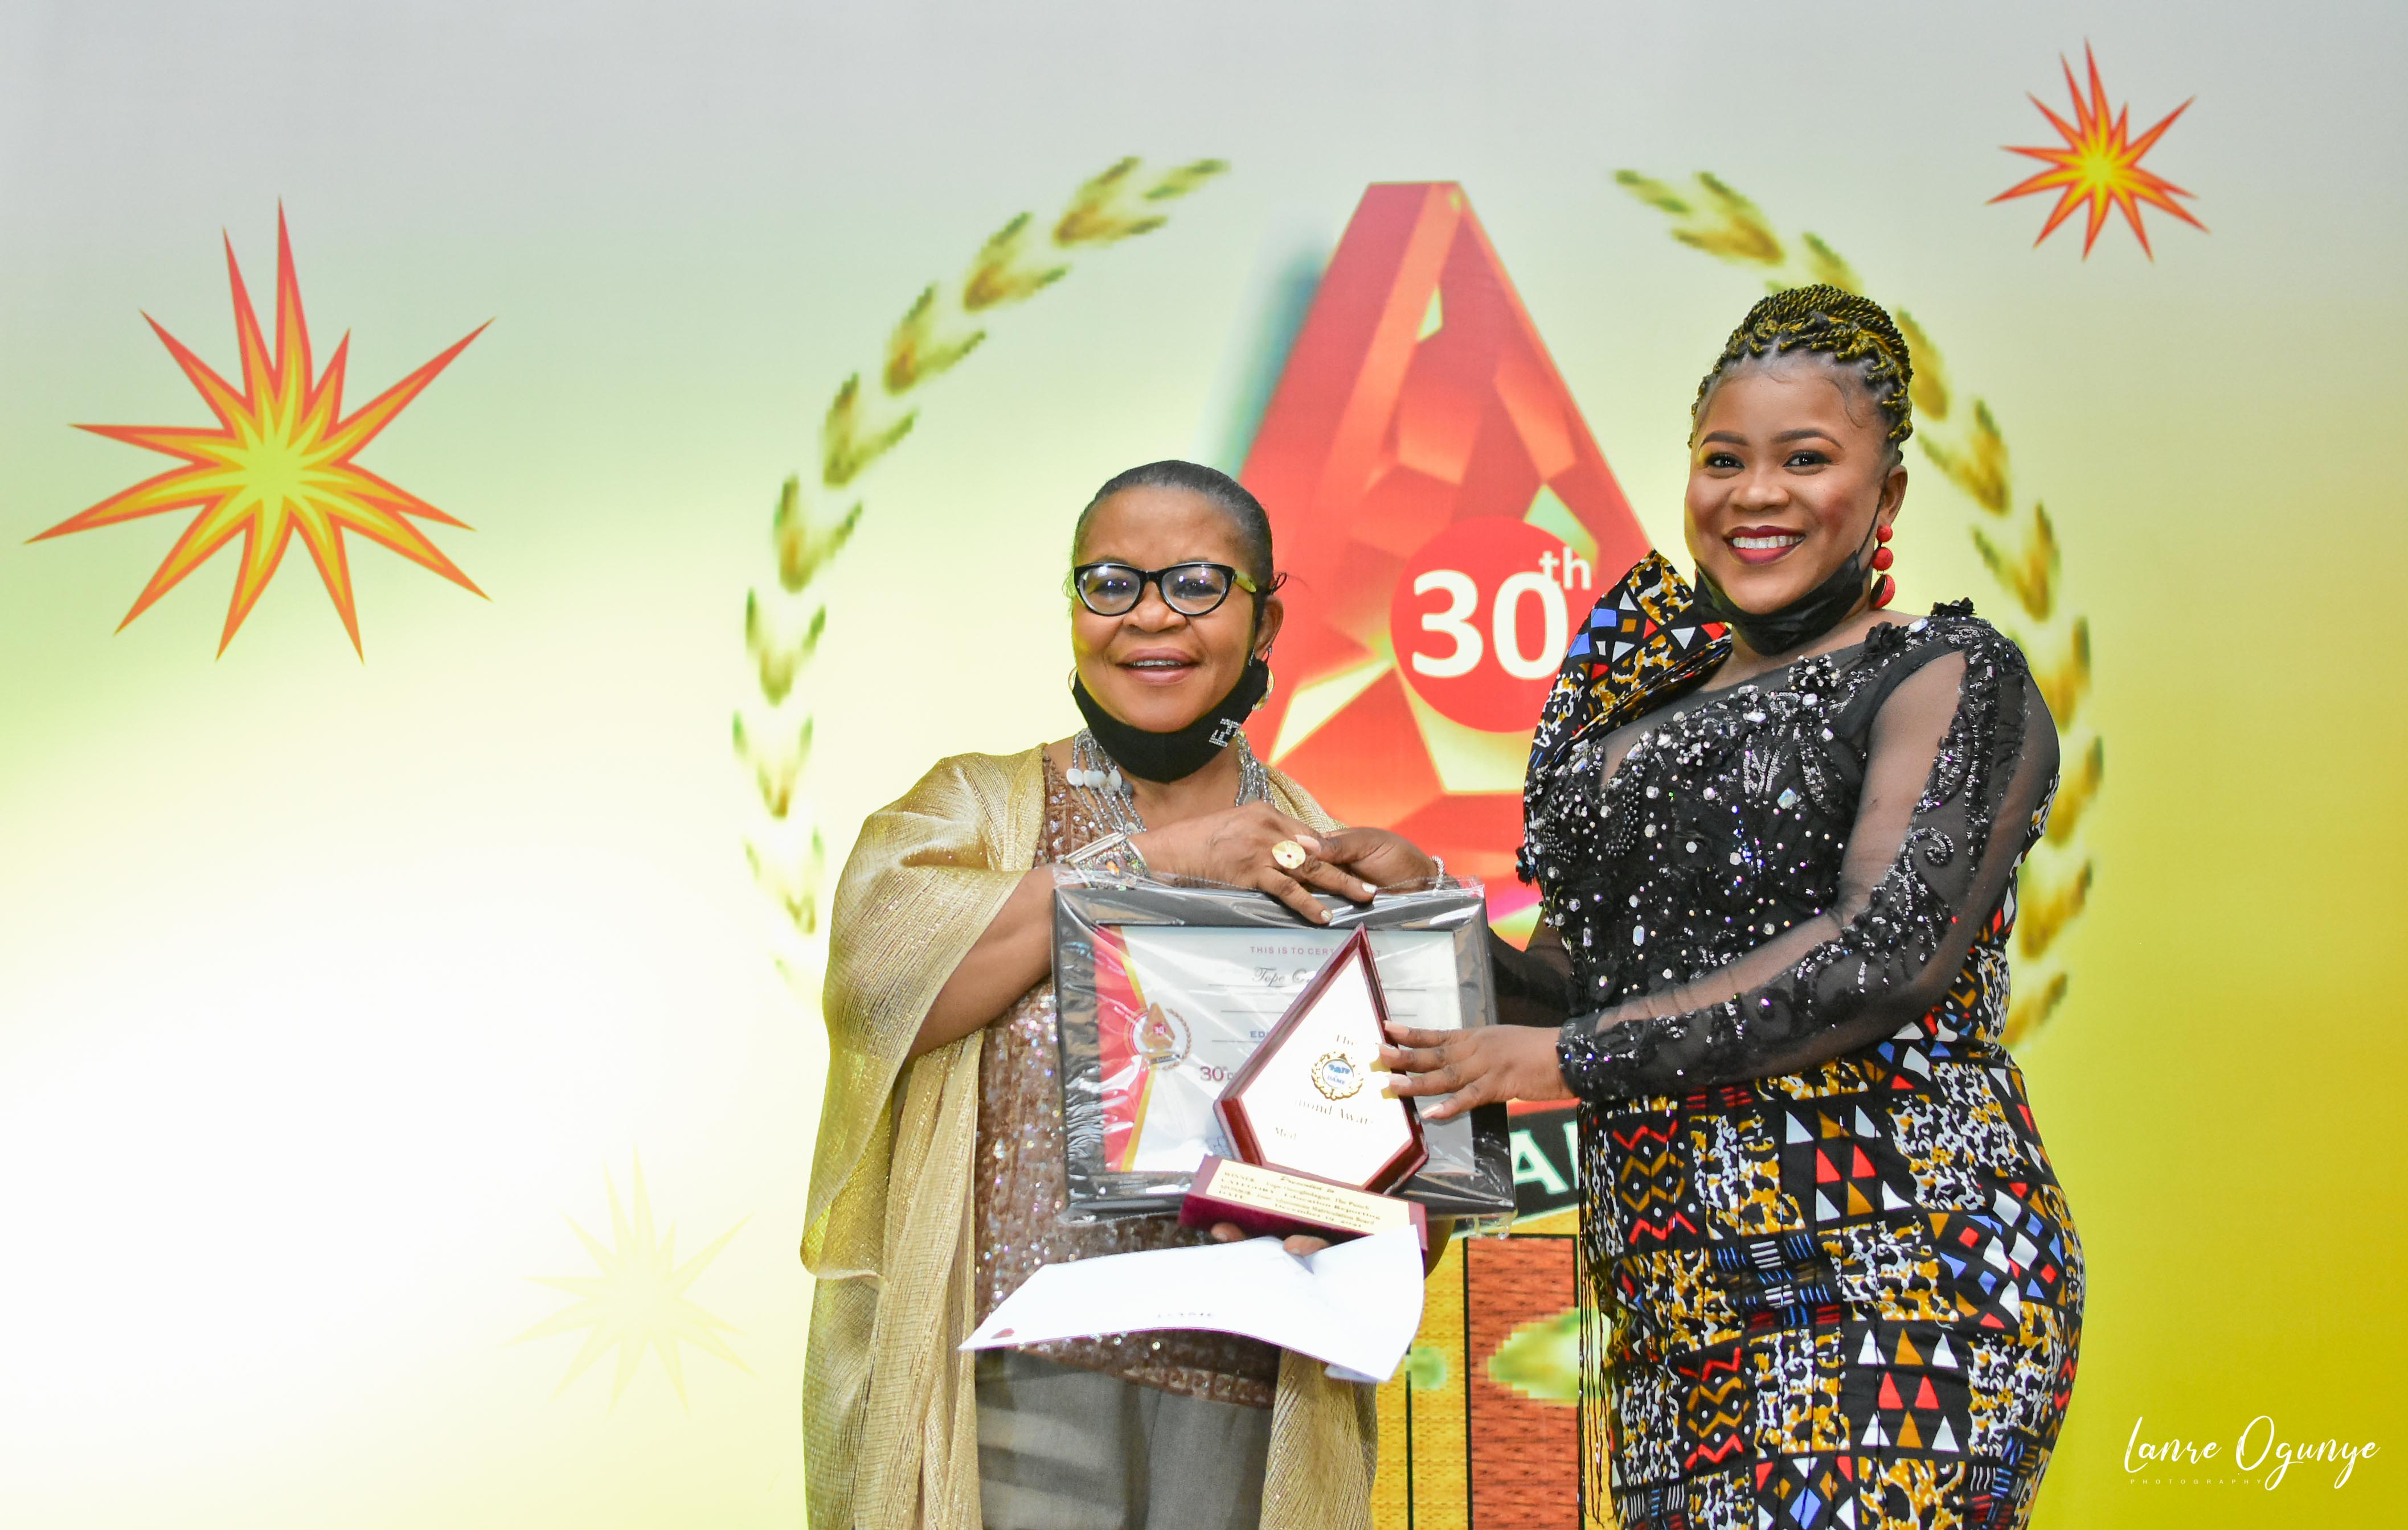 <span  class="uc_style_uc_tiles_grid_image_elementor_uc_items_attribute_title" style="color:#ffffff;">Education Reporter of the Year Temitope Omogbolagun</span>